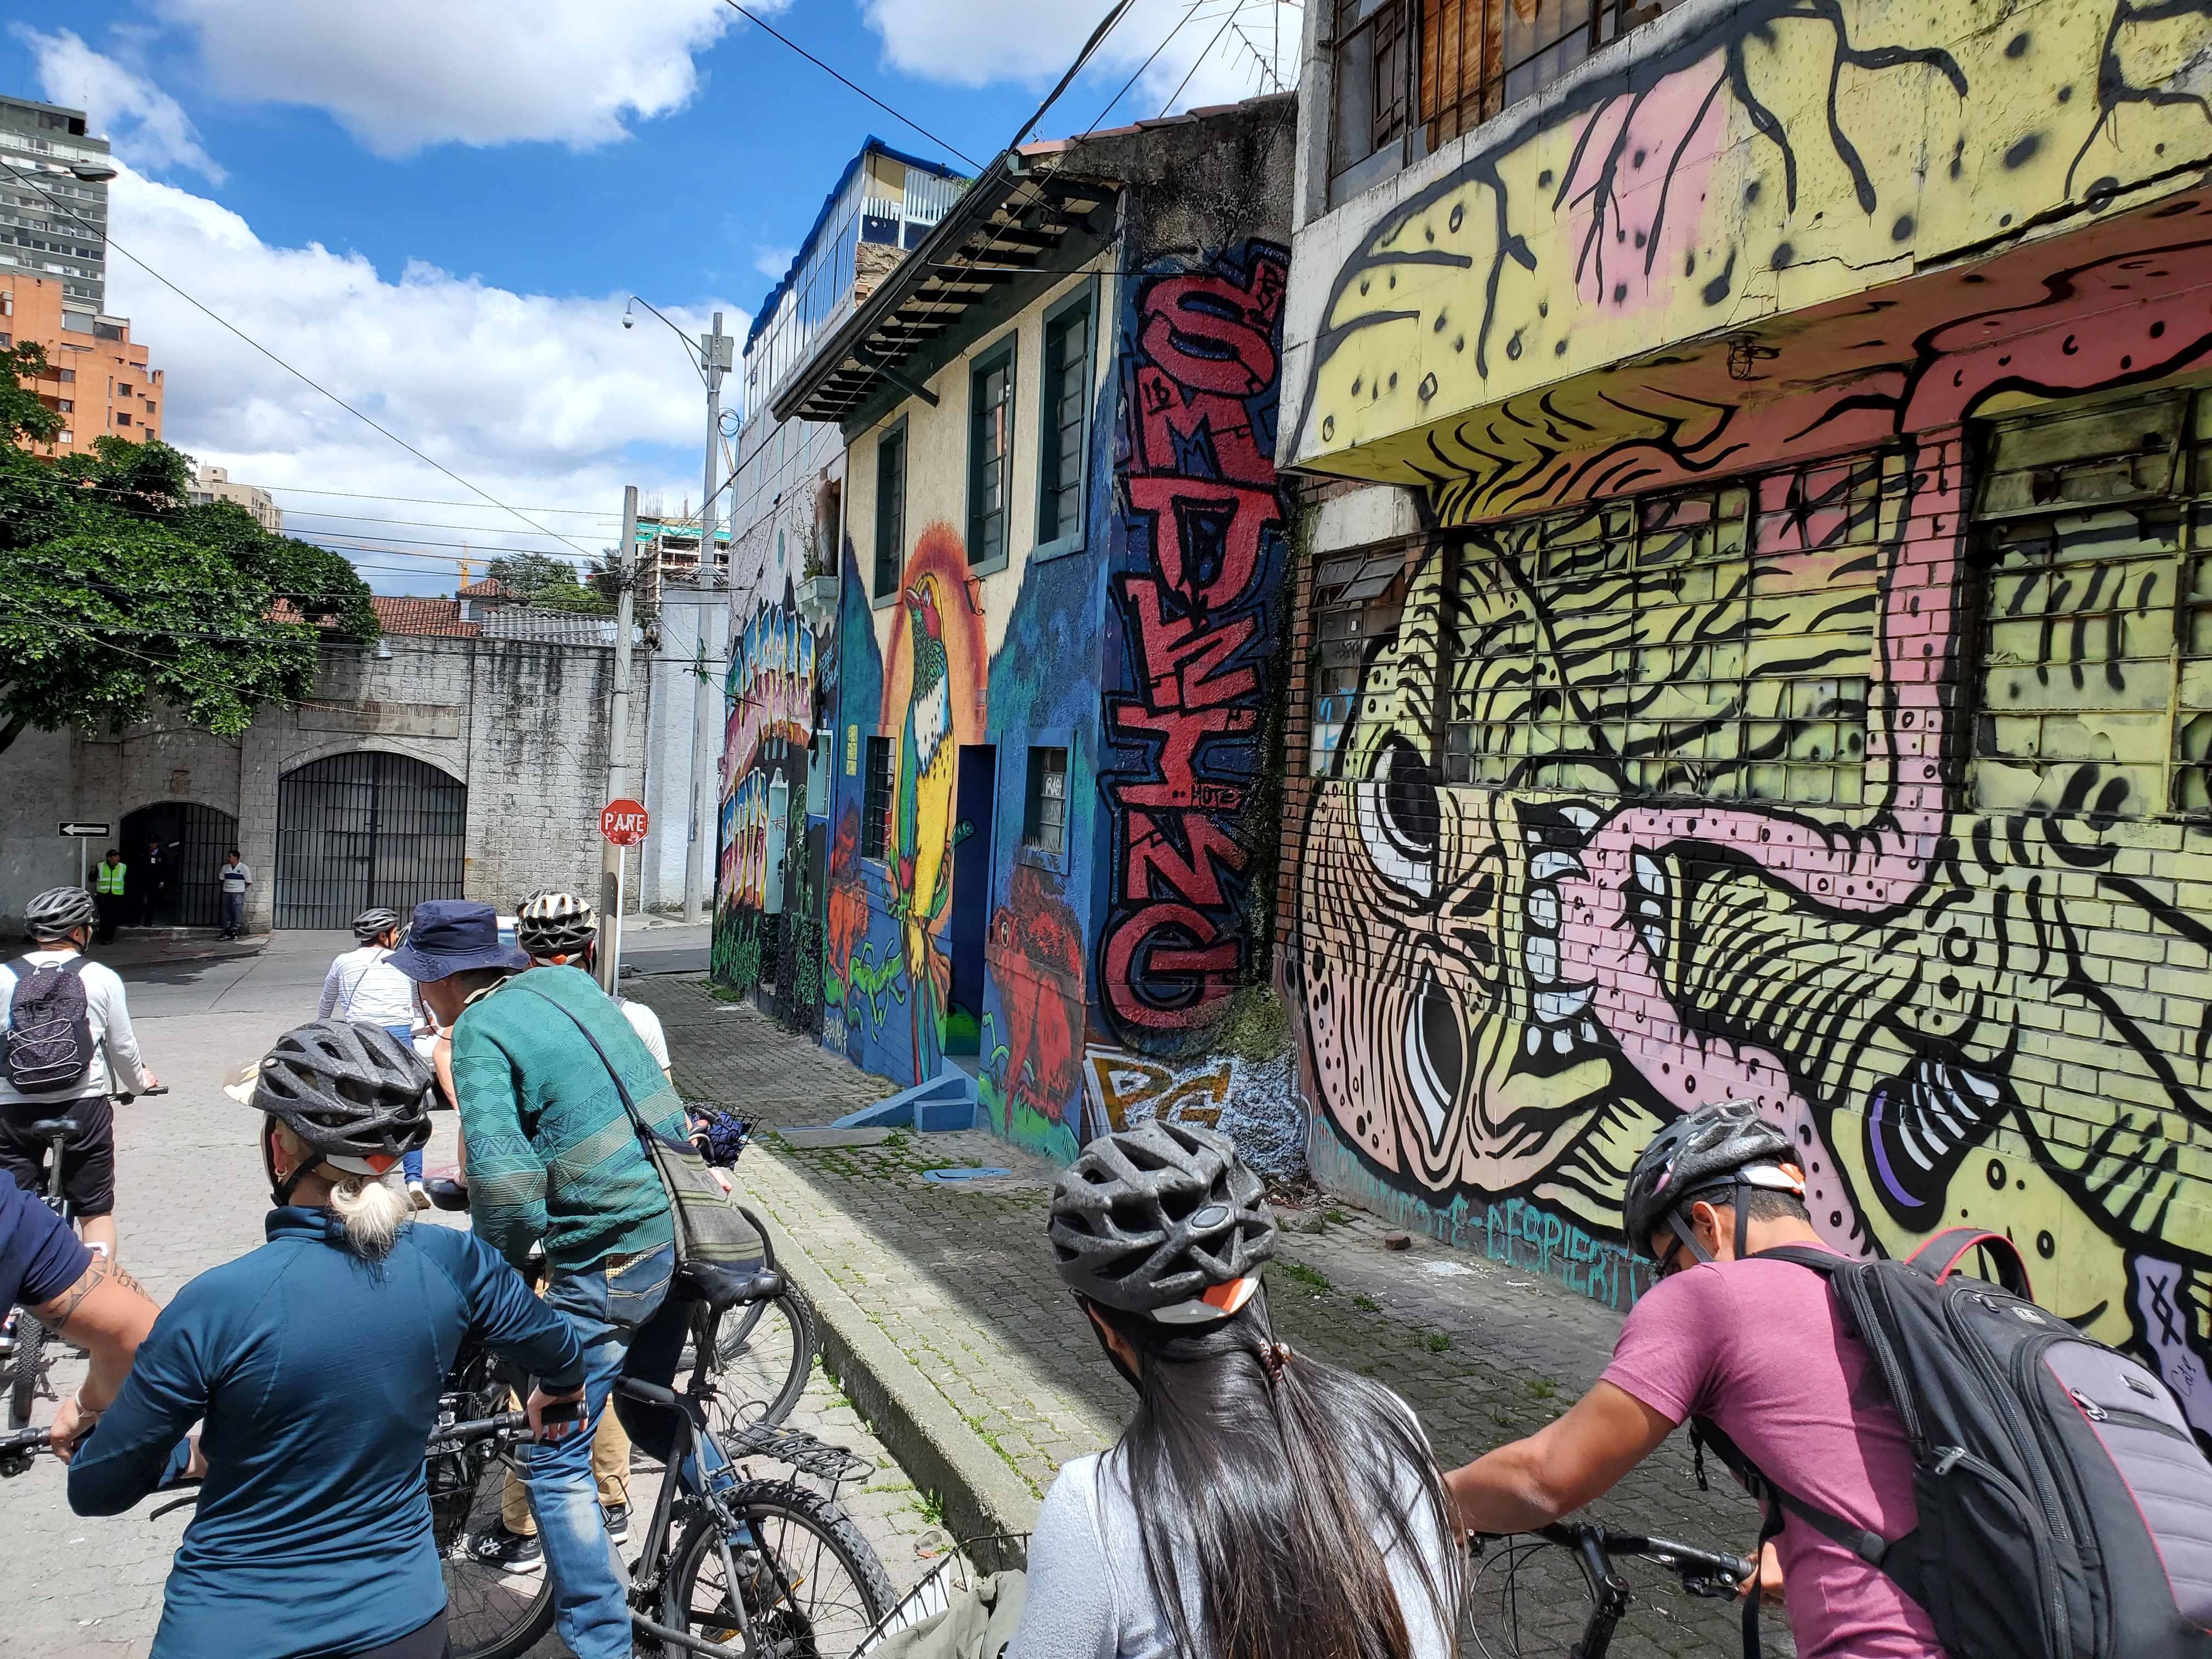 Cycling along Bogotá's side streets is a window into the city's thriving street art